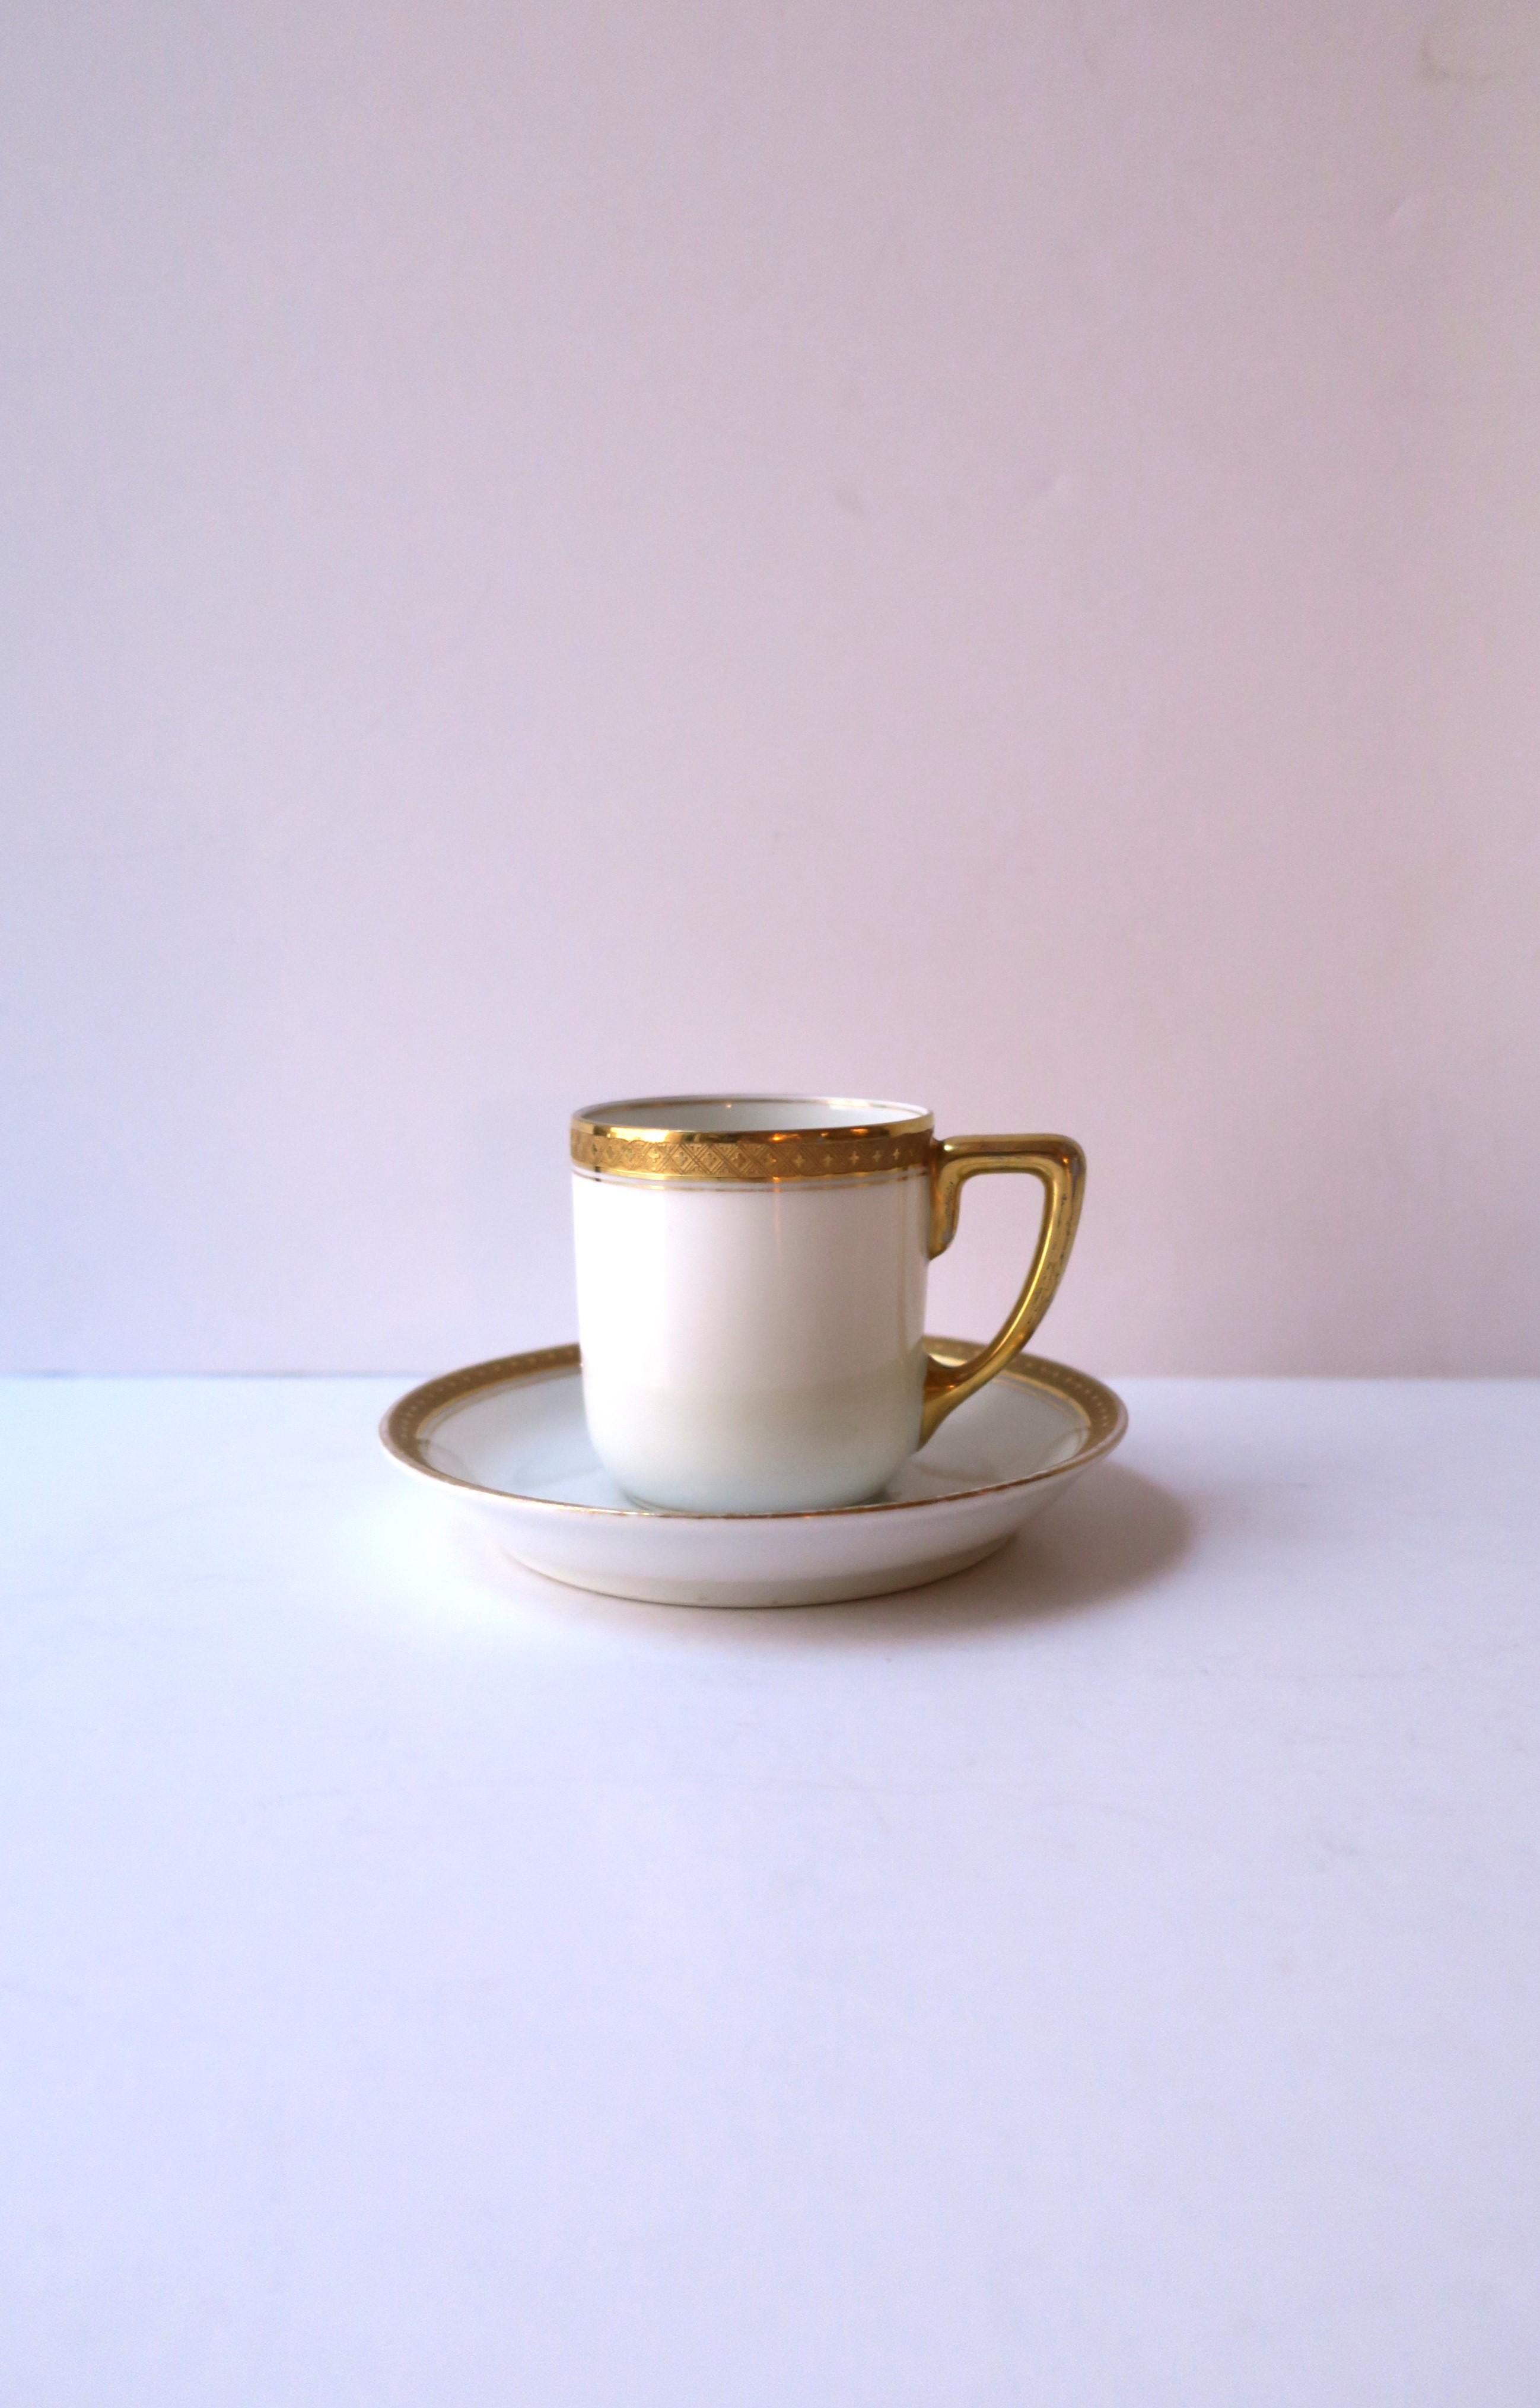 A beautiful German white porcelain and gold gilt coffee espresso or tea demitasse cup and saucer by Rosenthal, circa early-20th century, Germany. This white porcelain cup and saucer has a slightly raised gold gilt relief detail around cup and saucer